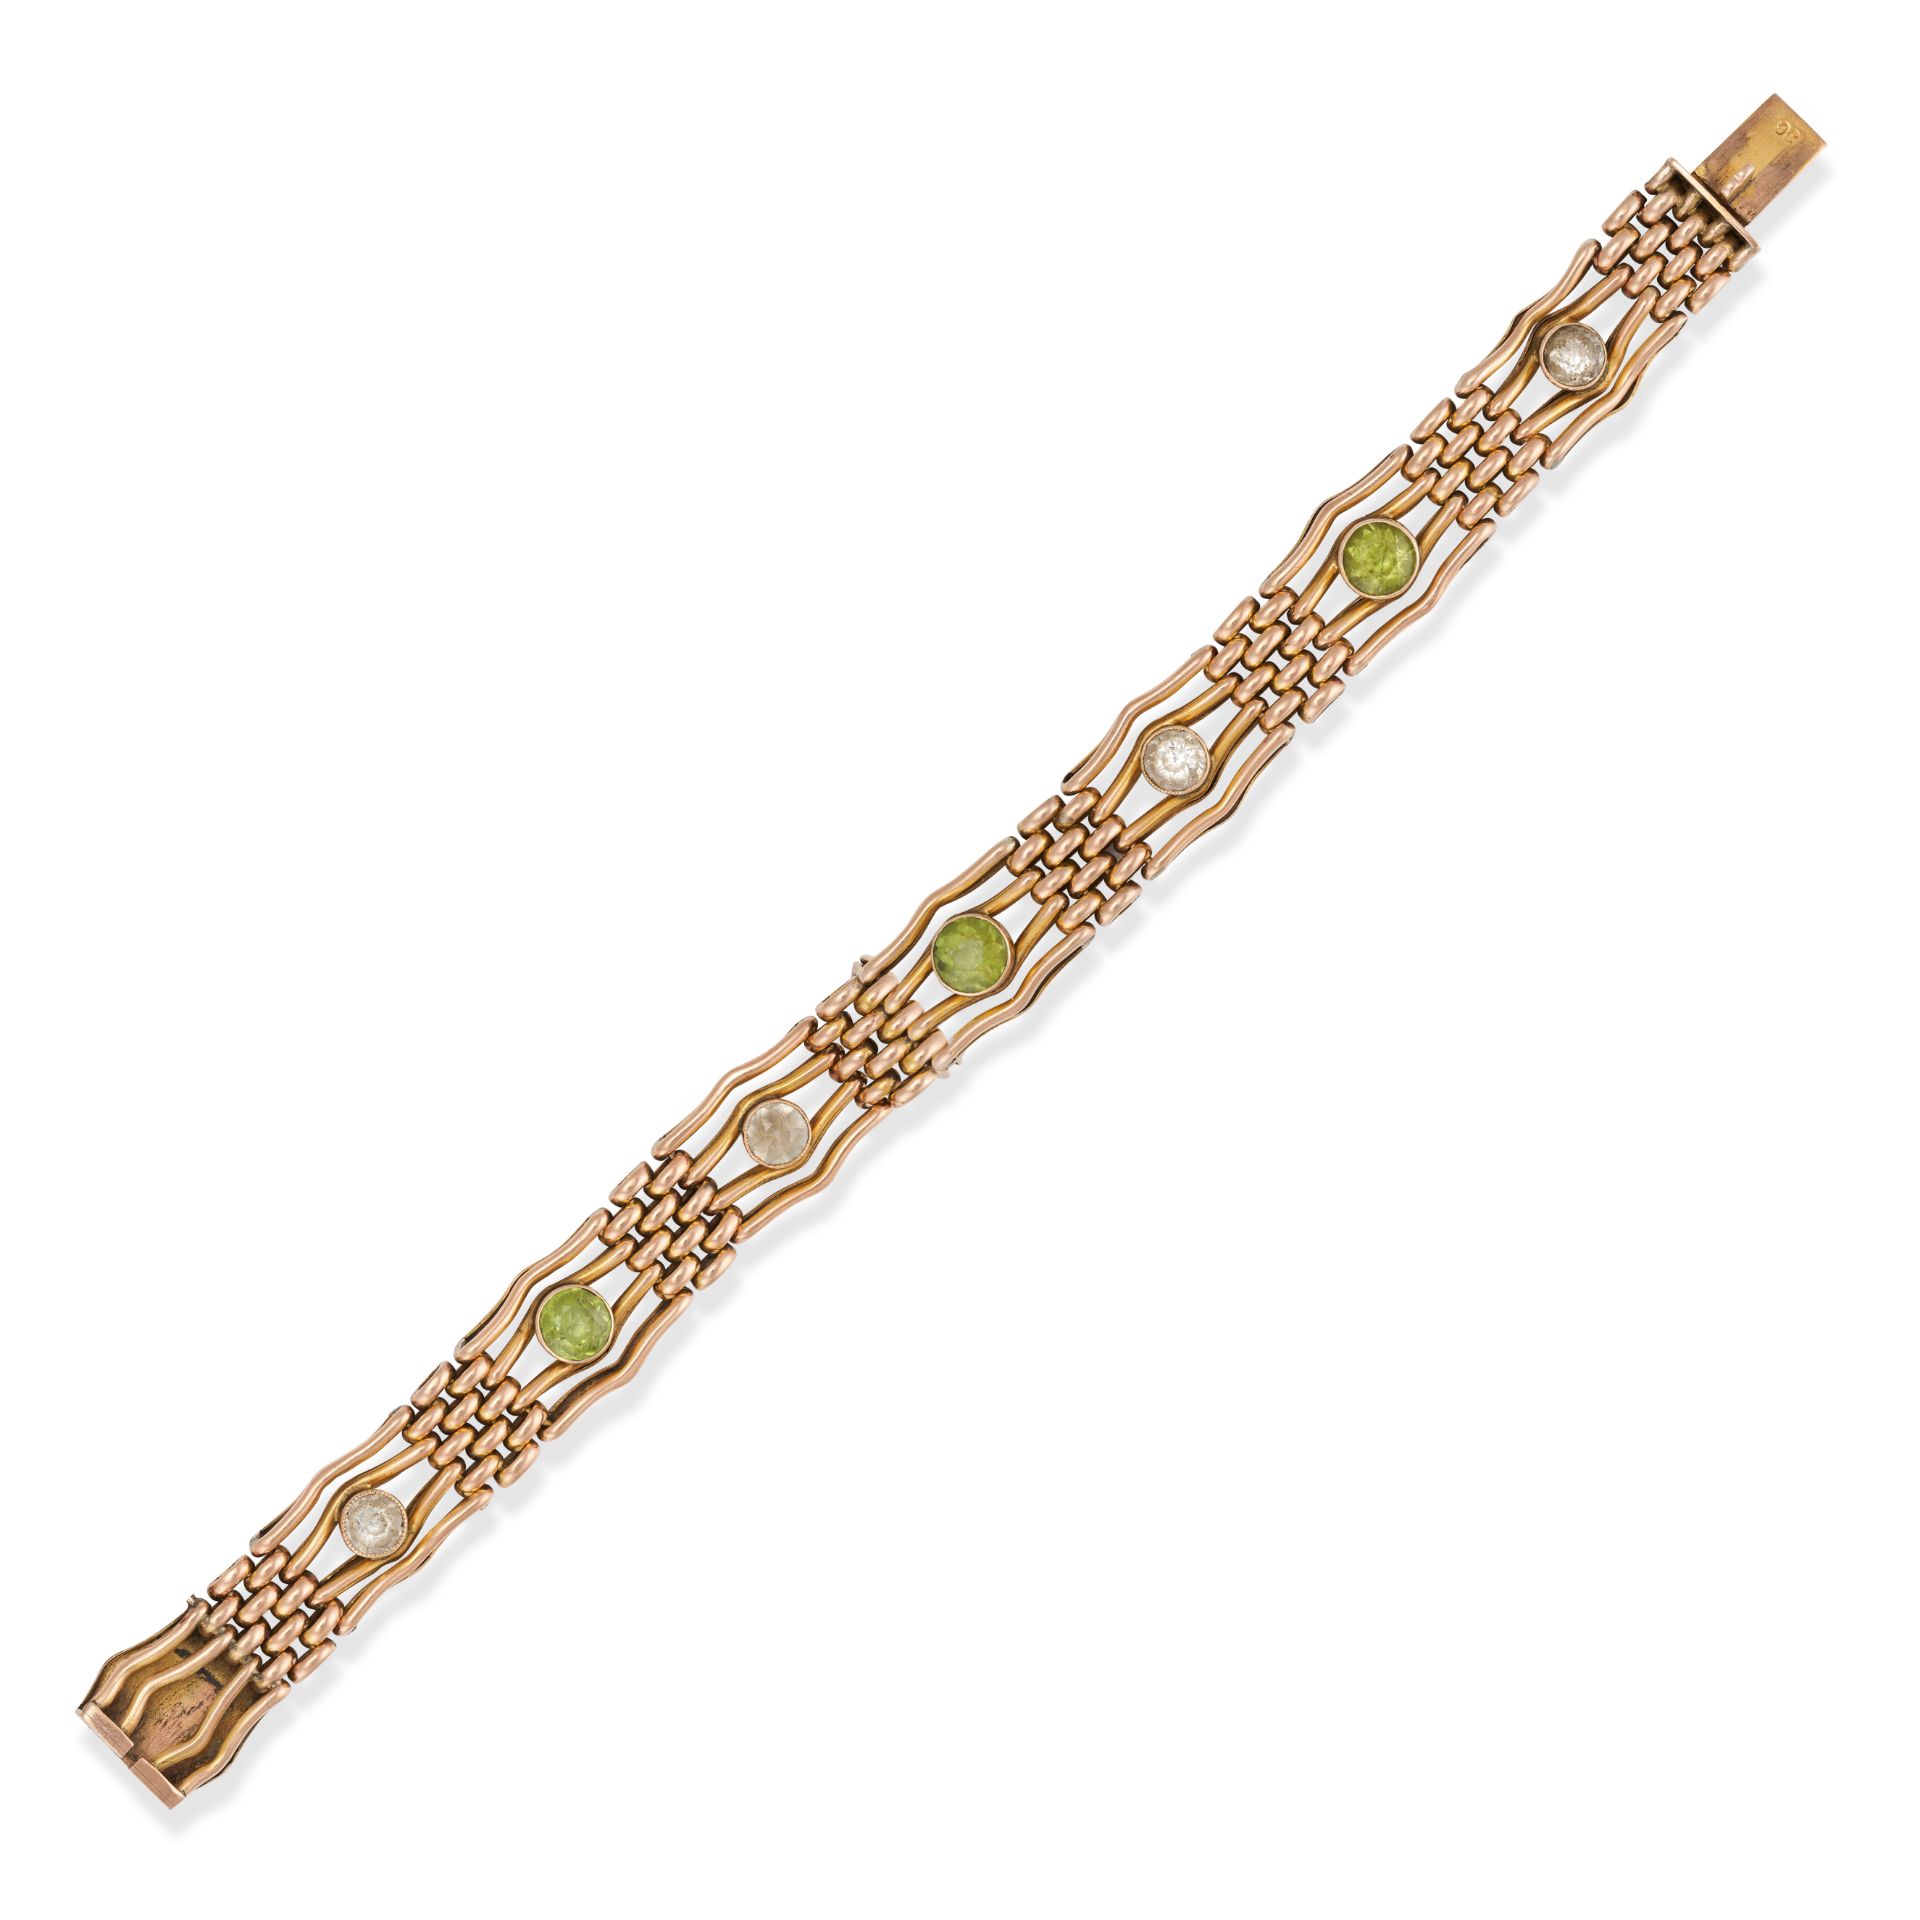 A PERIDOT AND WHITE SAPPHIRE GATE BRACELET in 9ct yellow gold, the gate bracelet set with alterna...